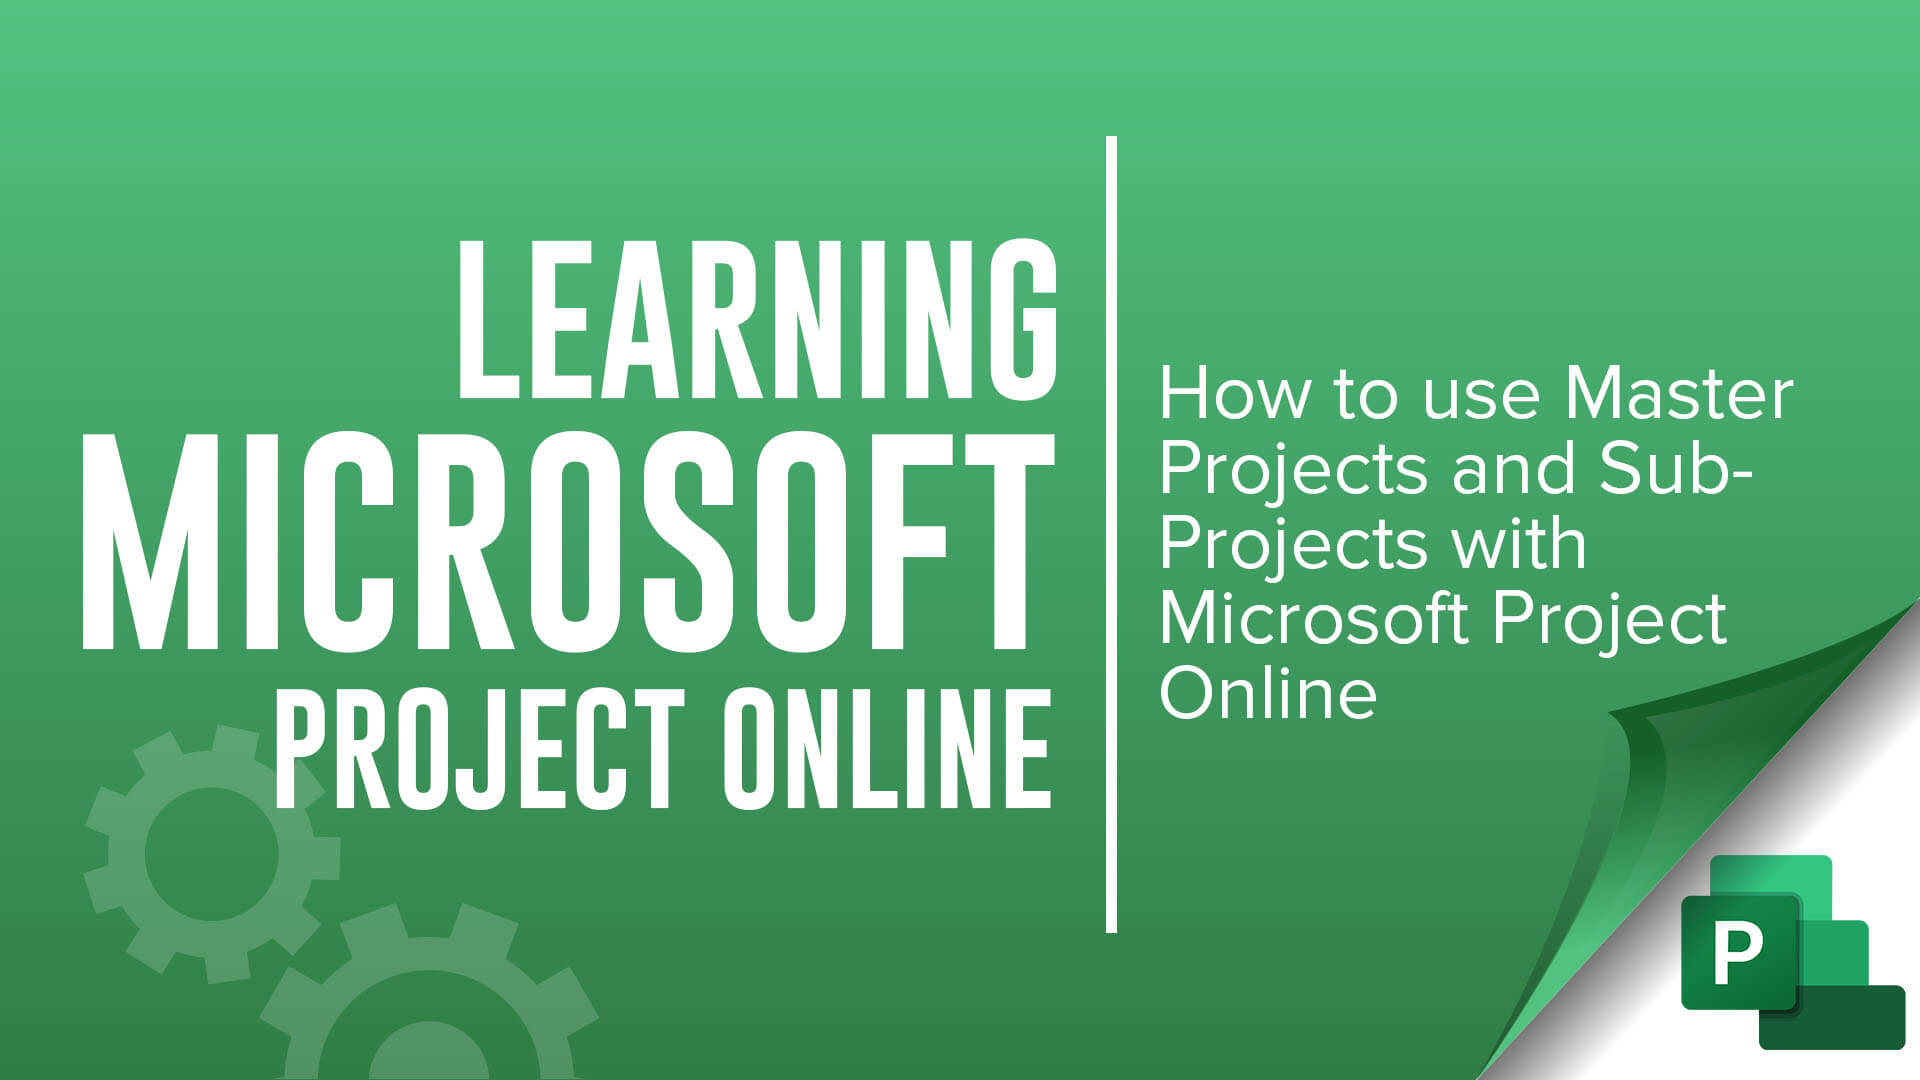 learning microsoft project online - how to use master projects and subprojects with microsoft project online